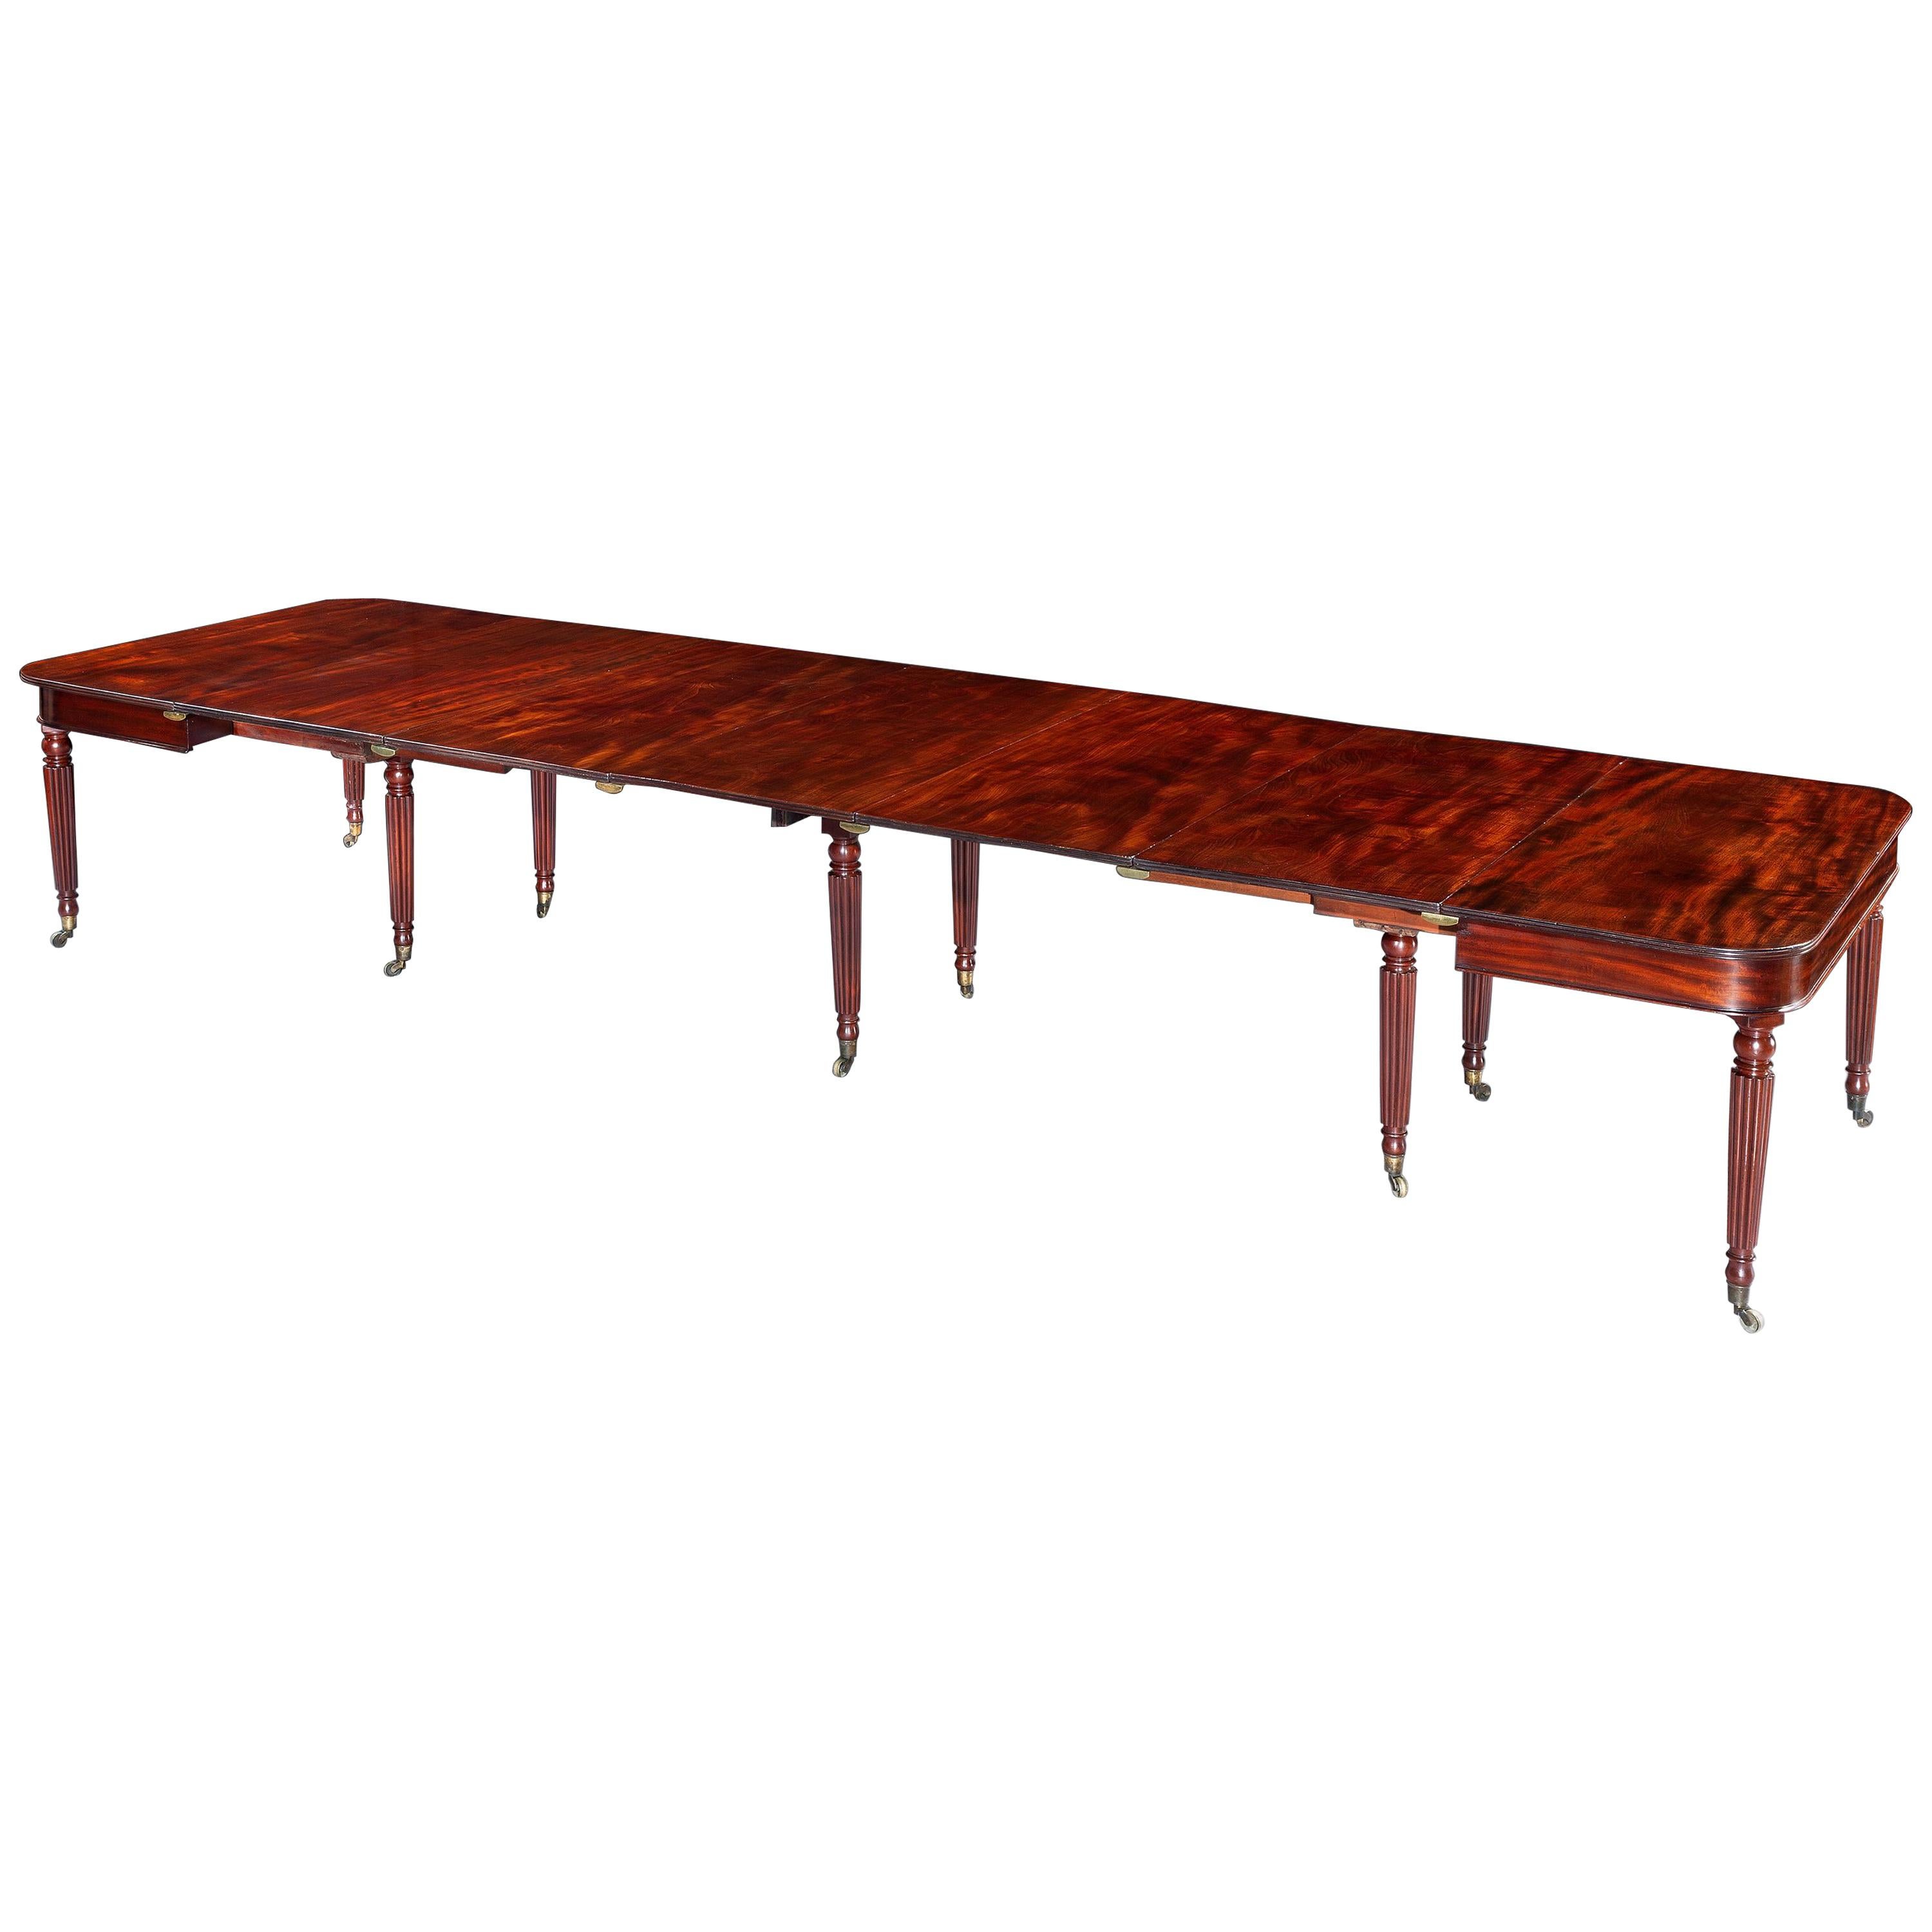 Late George III Regency Period Mahogany 'Imperial' Extending Dining Table For Sale